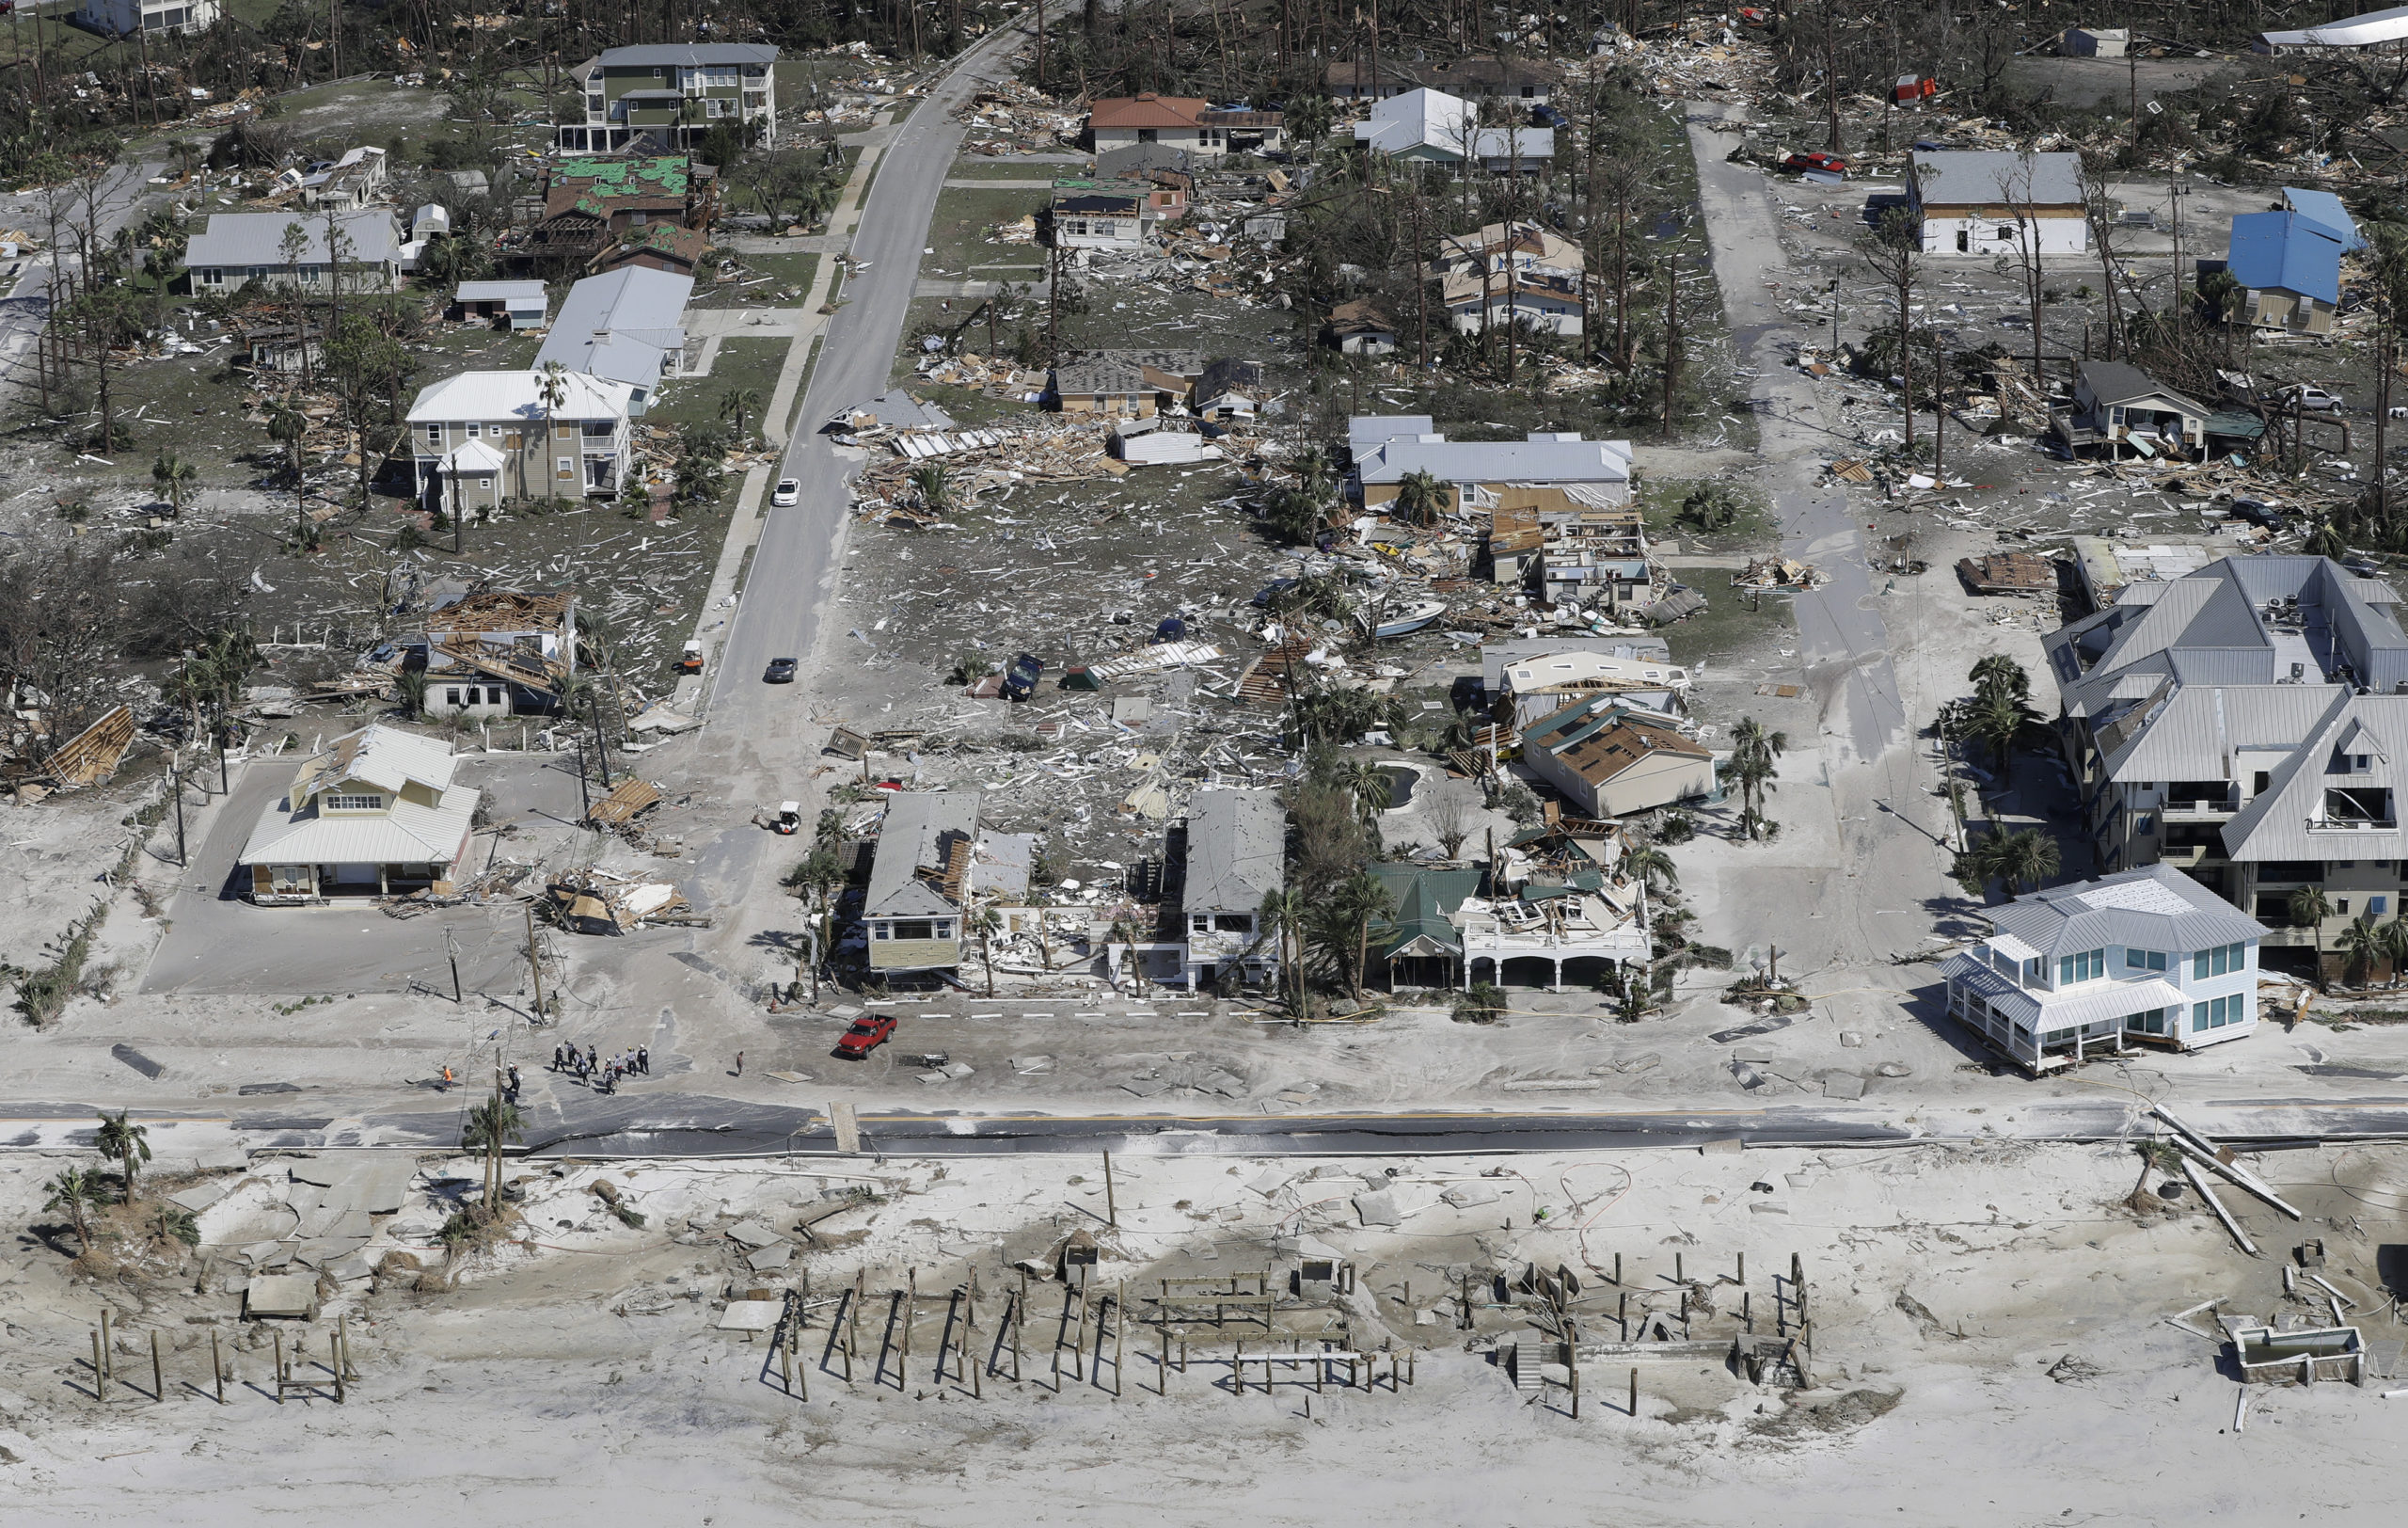 Homes destroyed by Hurricane Michael are shown in this aerial photo on Oct. 11, 2018, in Mexico Beach, Florida. The hurricane hit the panhandle area with Category 4 winds causing major damage. (Photo: Chris O’Meara-Pool, Getty Images)